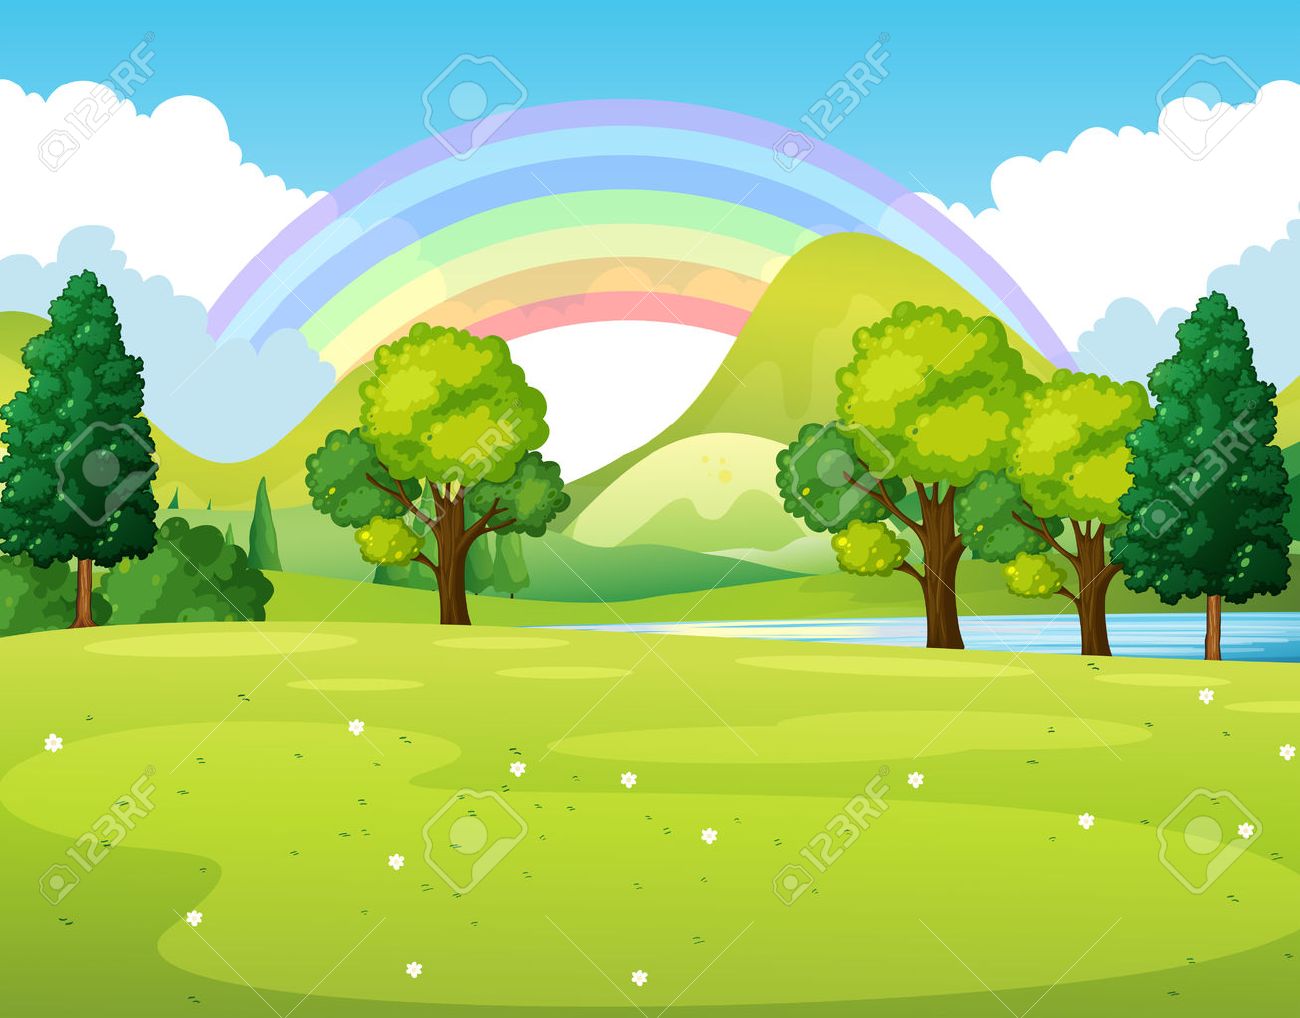 Nature scene of a park with rainbow illustration